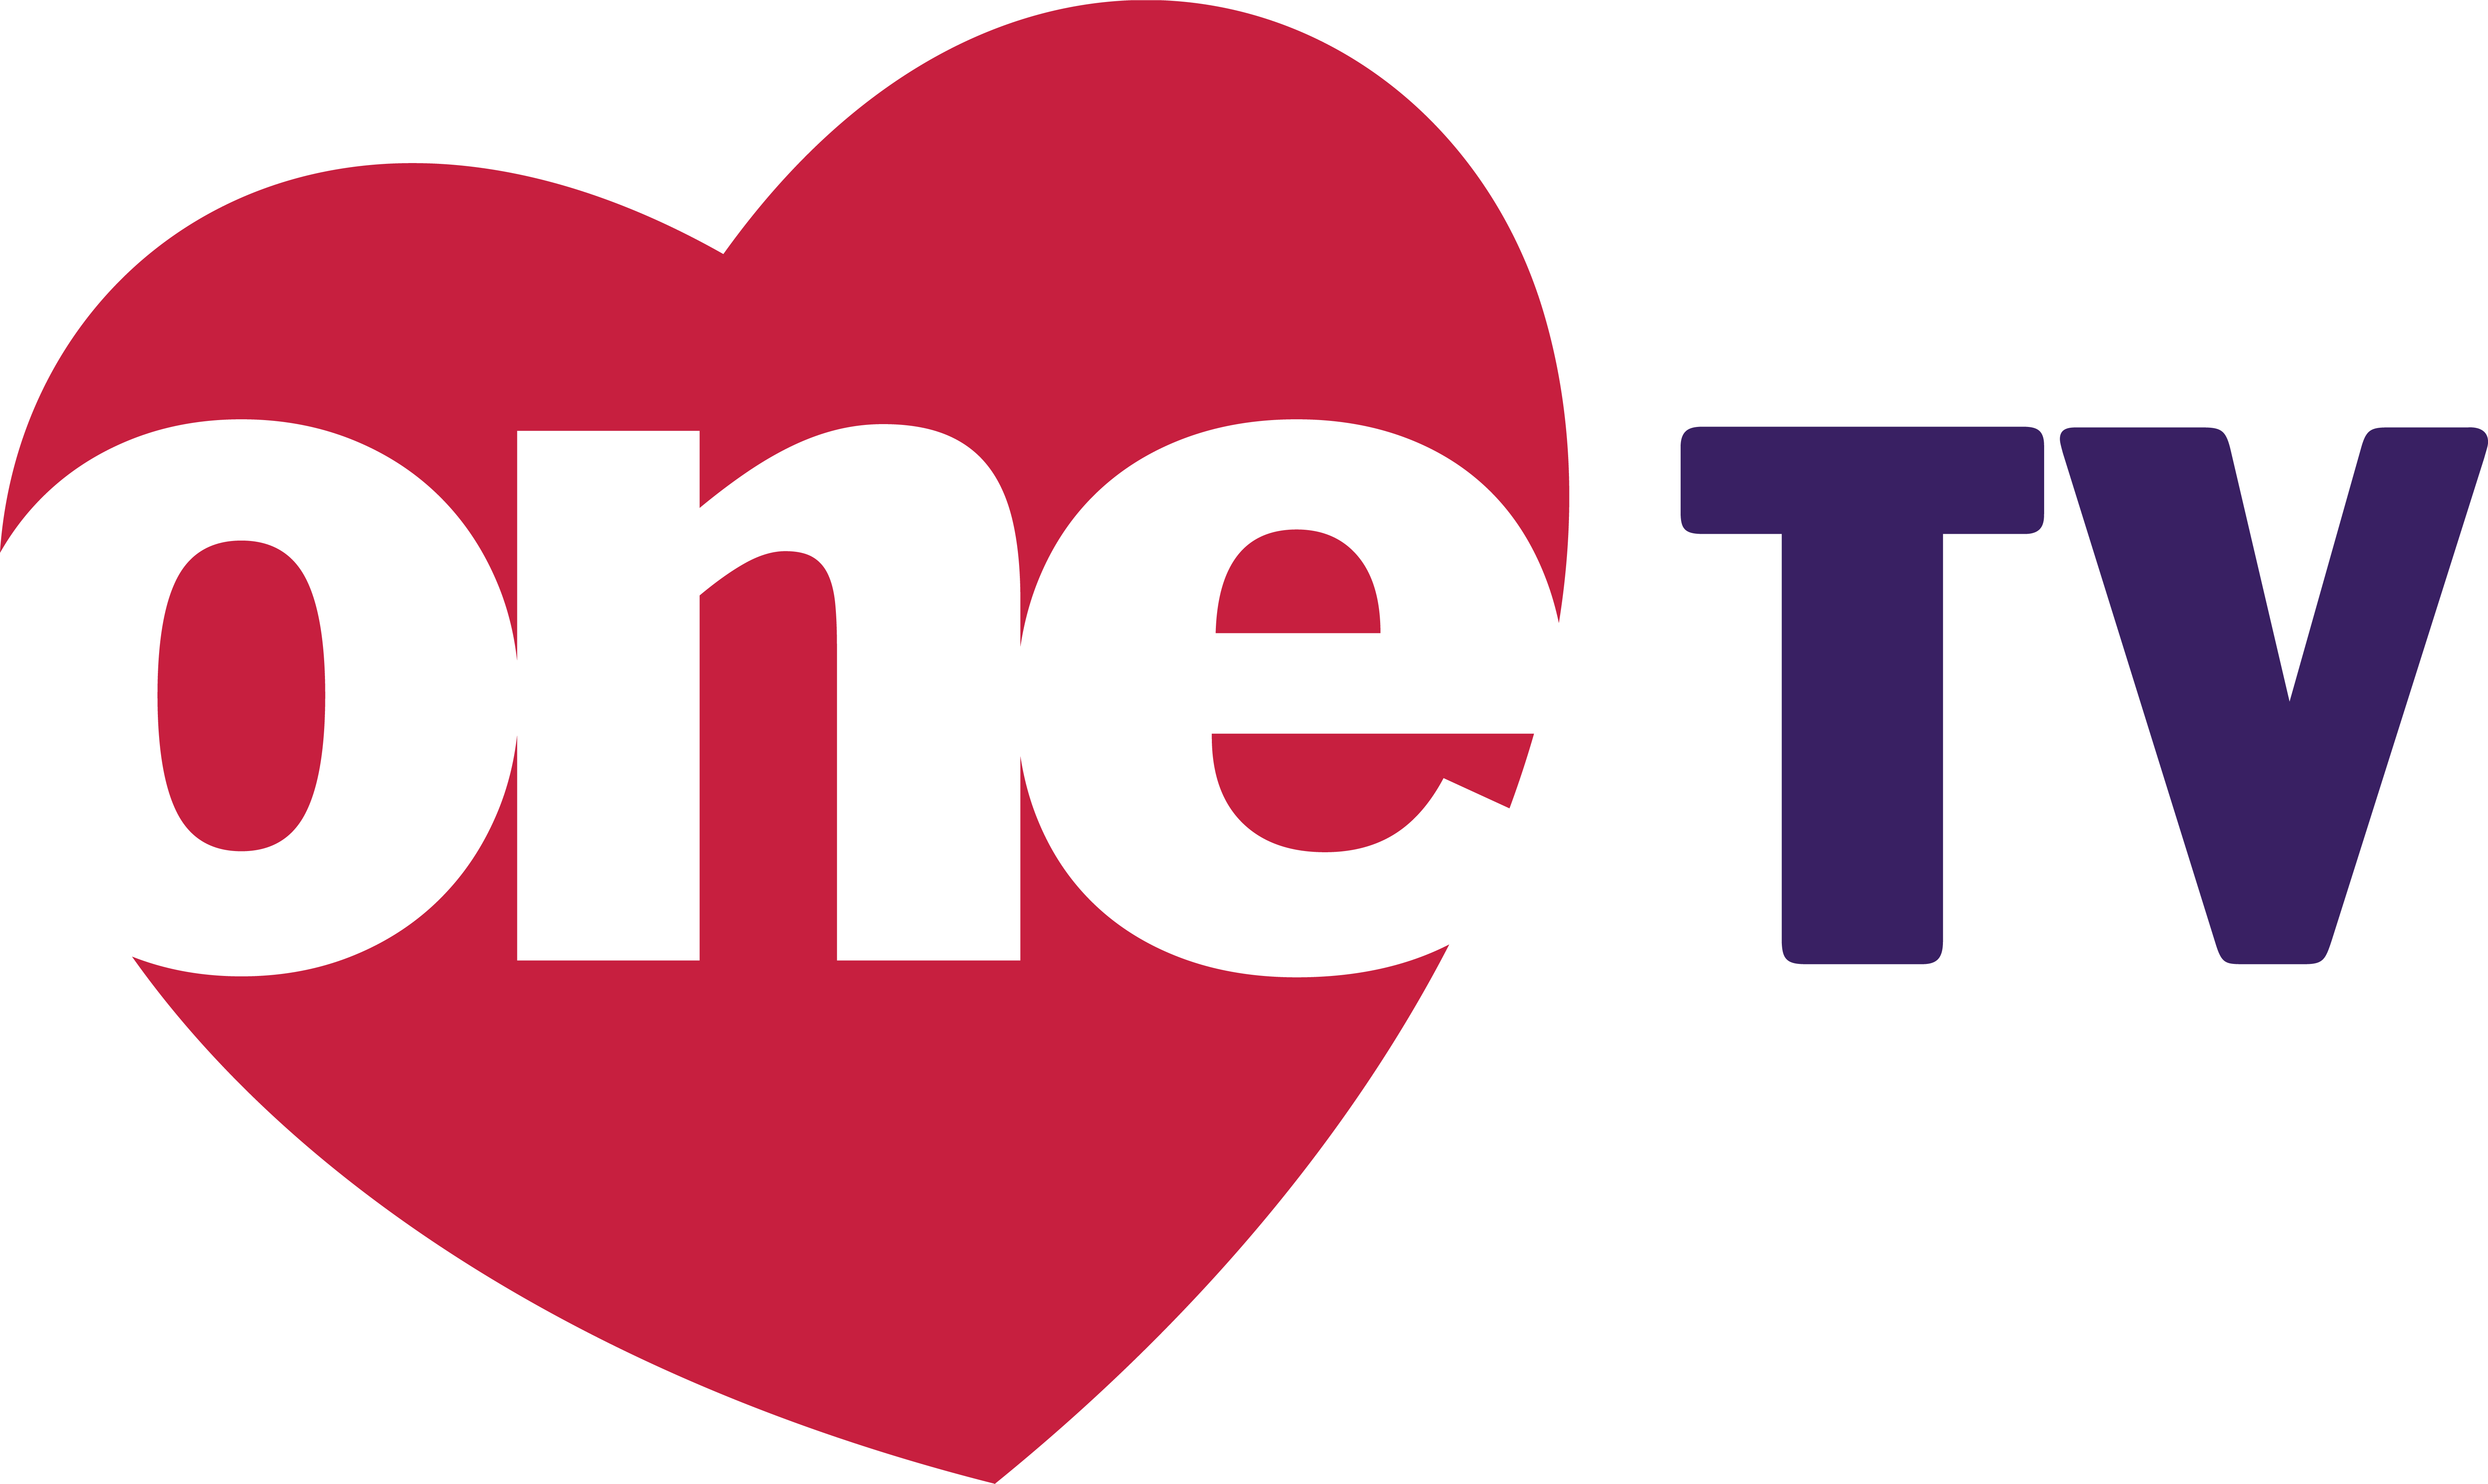 Channel logo for One TV